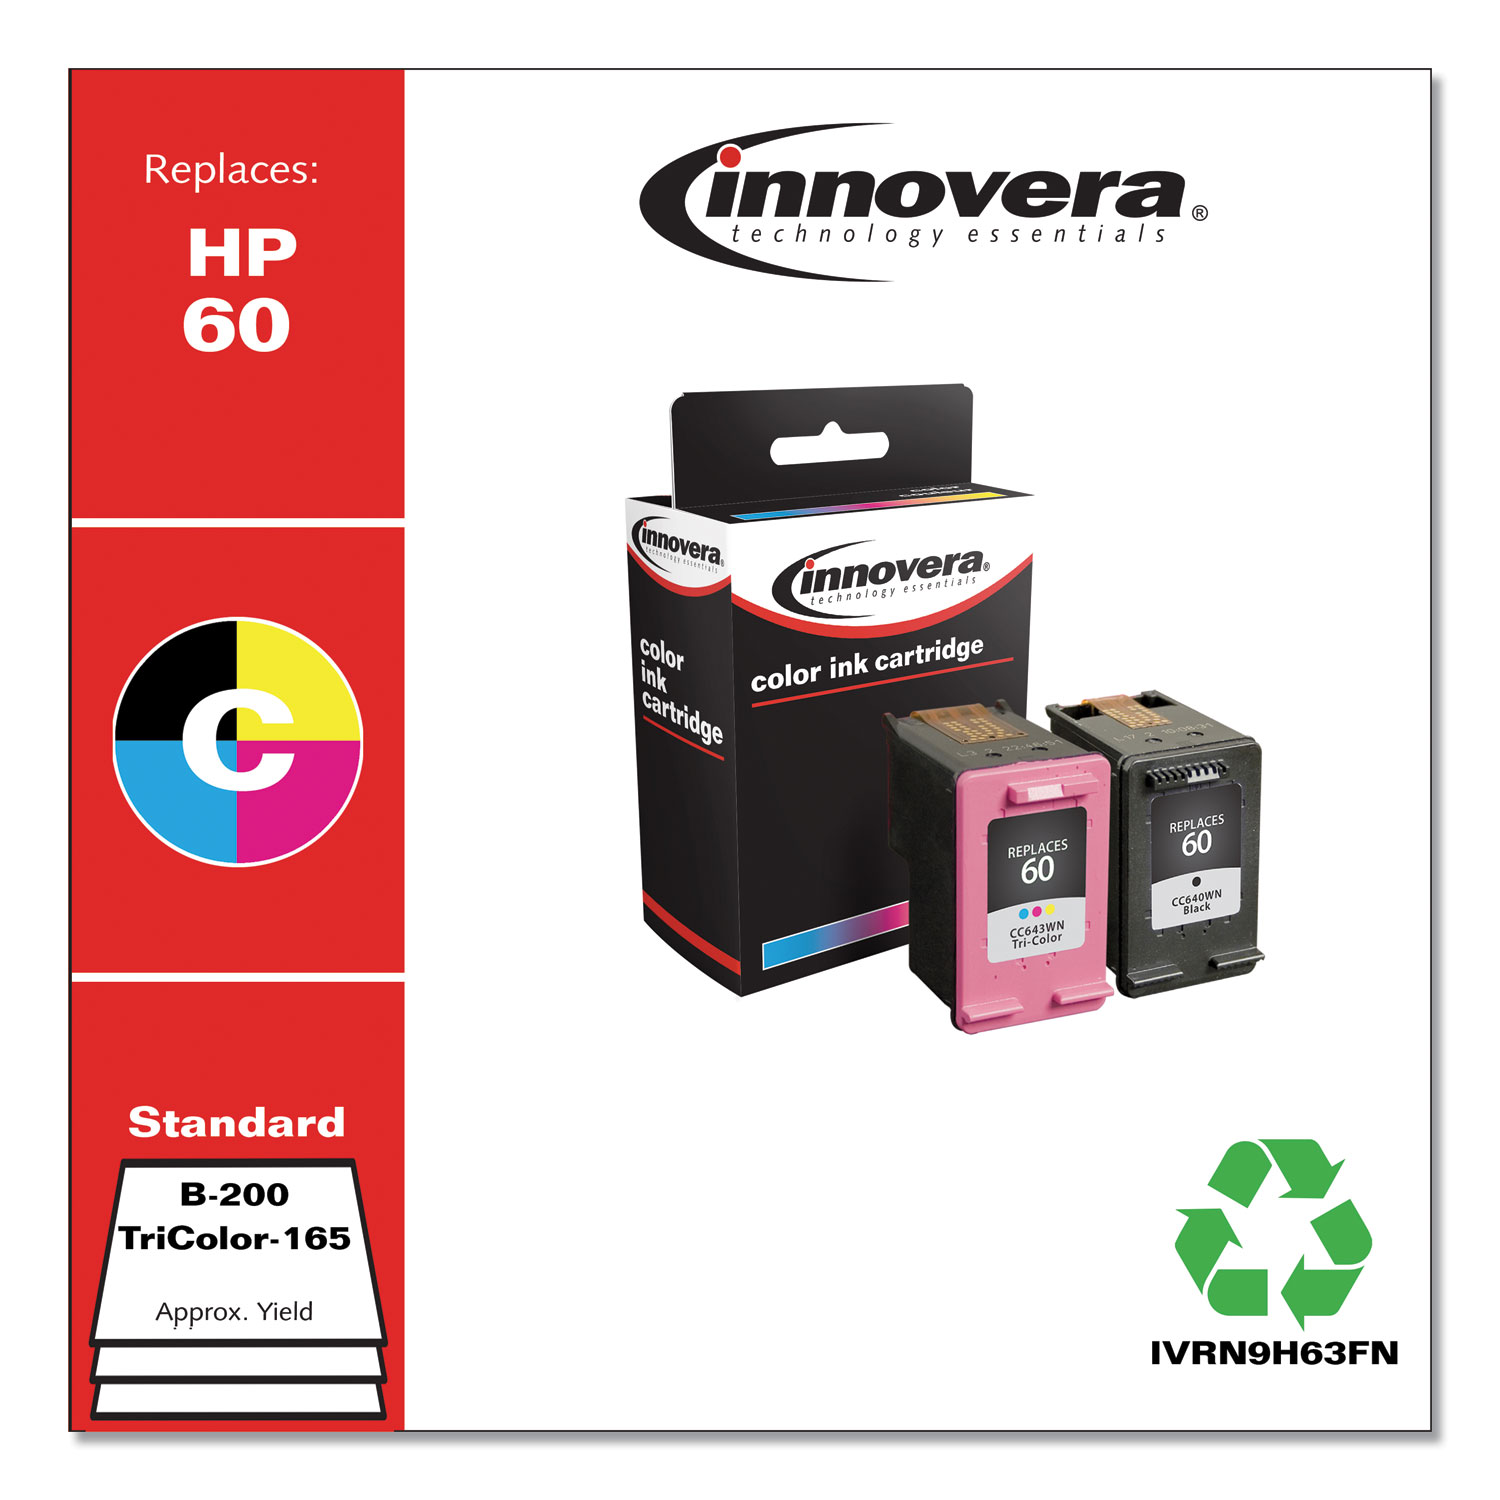  Innovera IVRN9H63FN Remanufactured Black/Tri-Color Ink, Replacement for HP 60 (N9H63FN), 200/165 Page-Yield (IVRN9H63FN) 